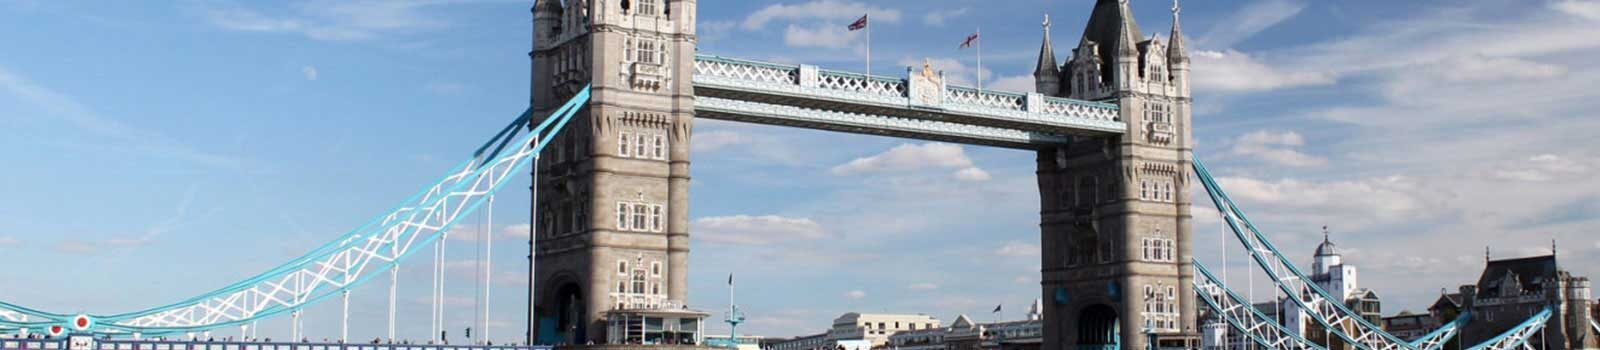 Study Foundation Courses in London